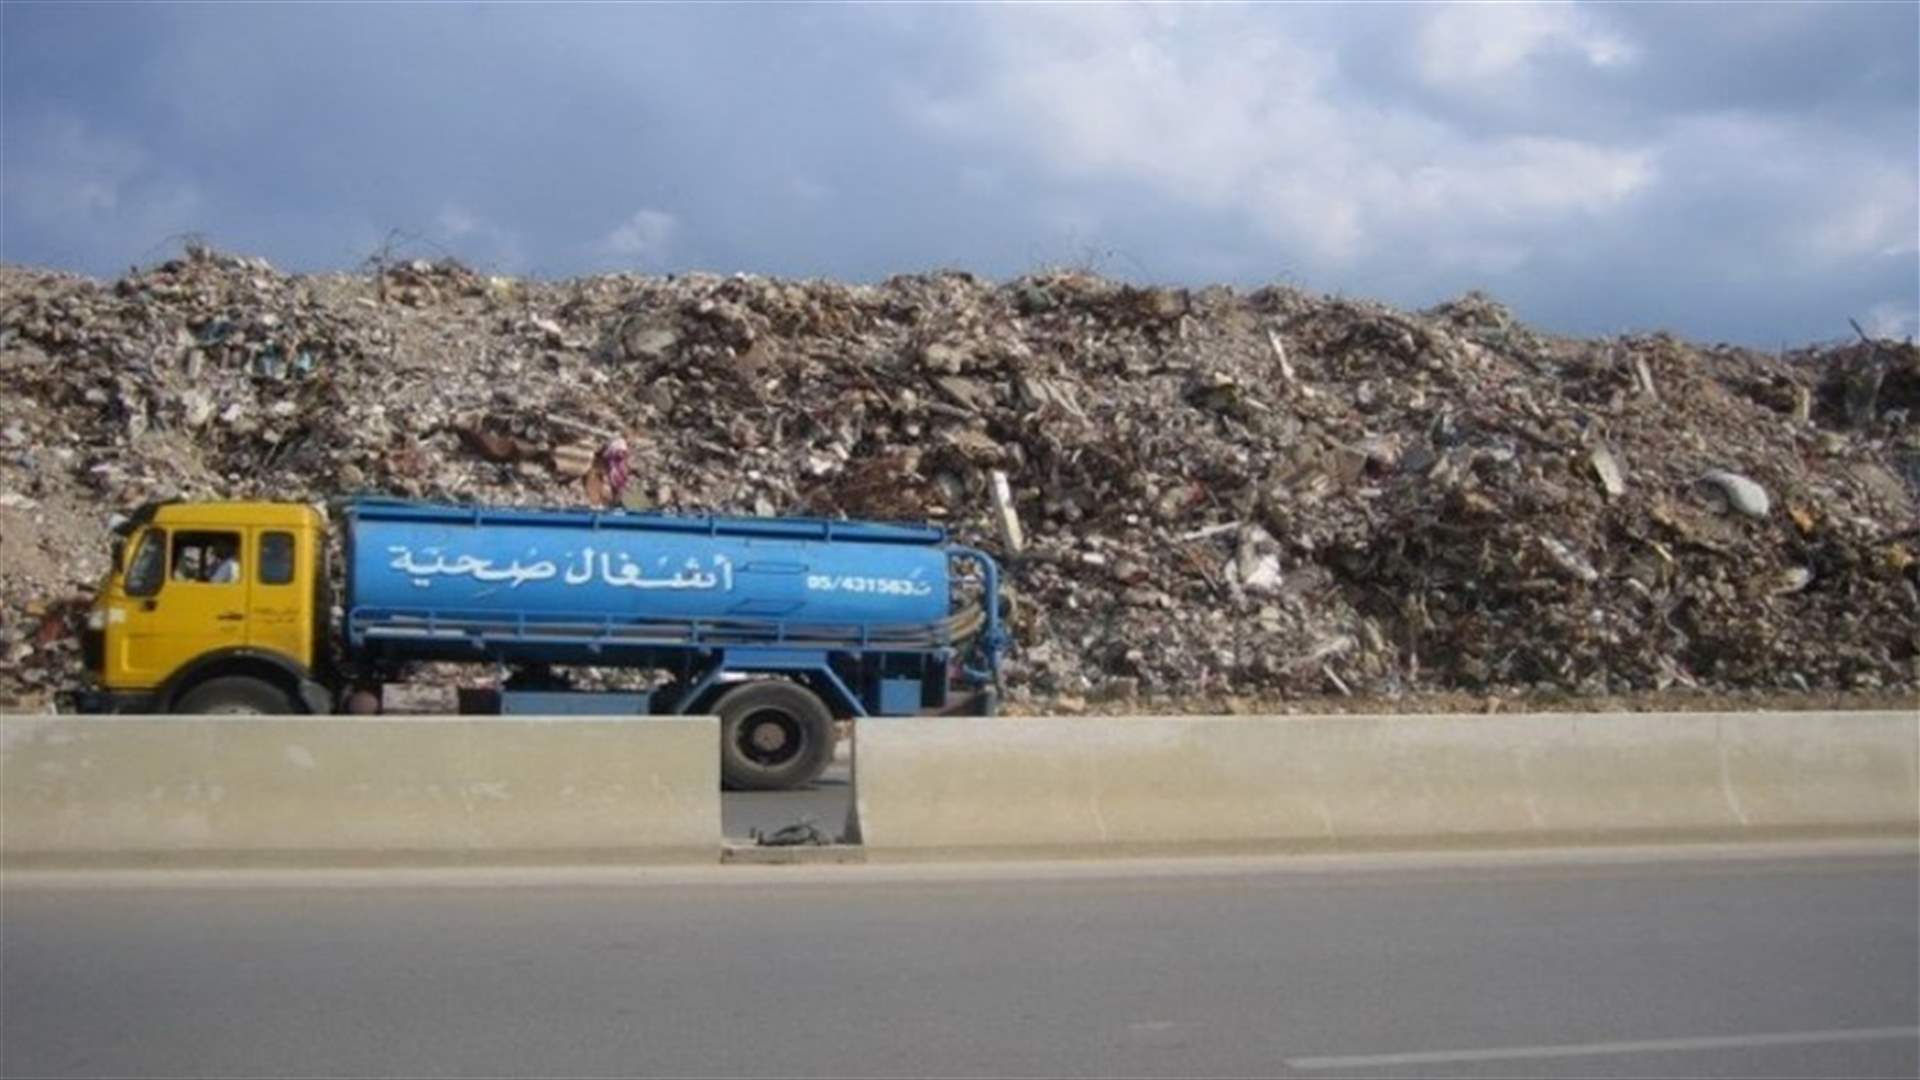 Beirut southern suburbs’ Union of Municipalities calls for opening Costa Brava landfill permanently